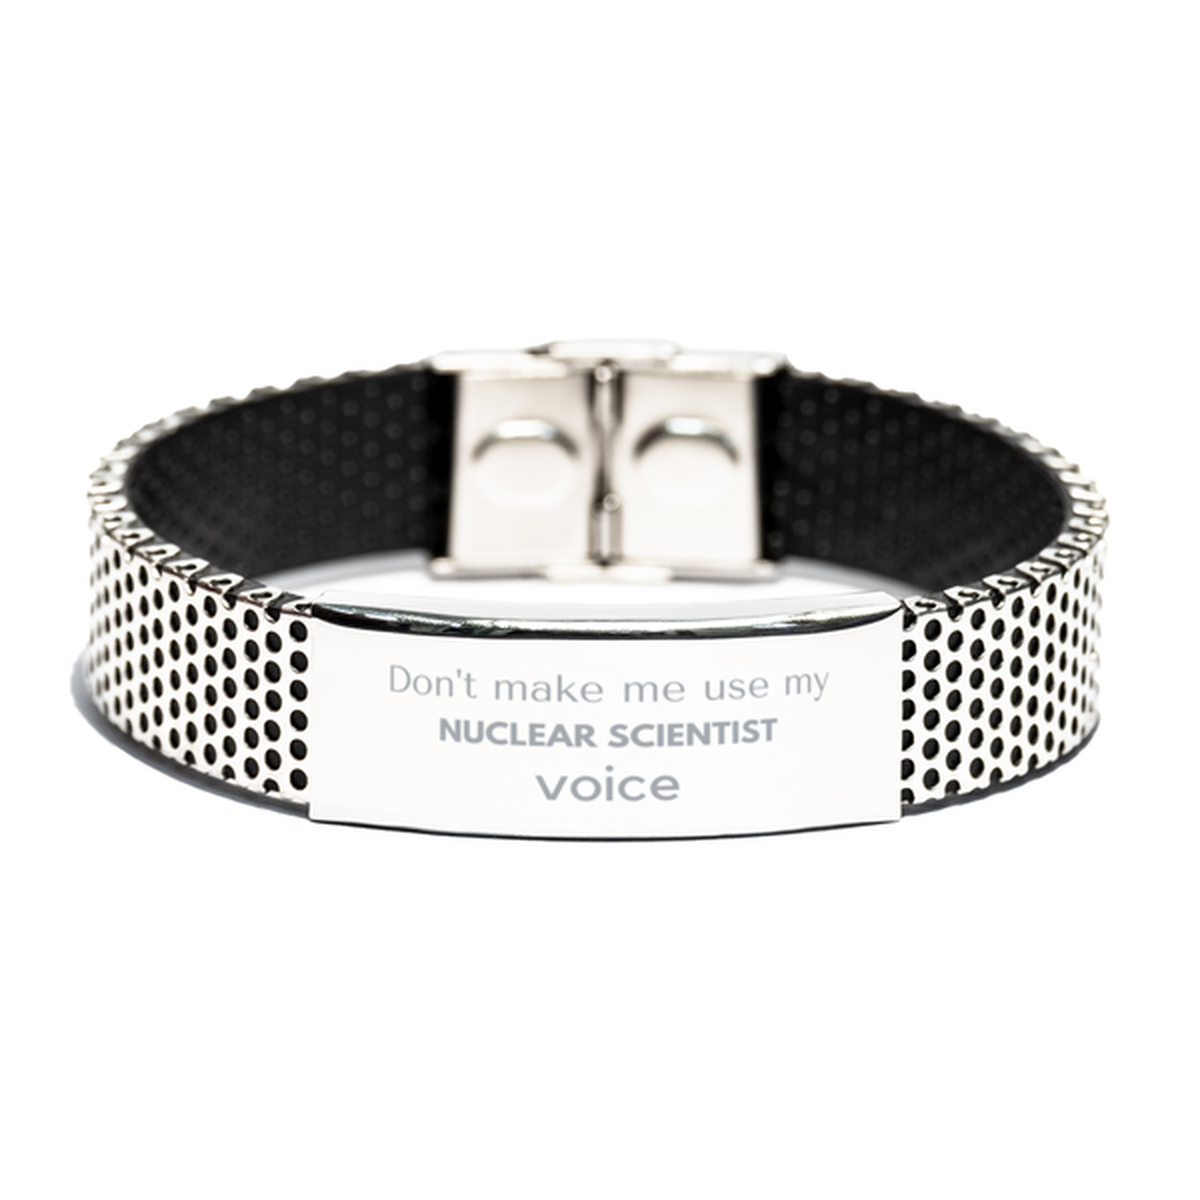 Don't make me use my Nuclear Scientist voice, Sarcasm Nuclear Scientist Gifts, Christmas Nuclear Scientist Stainless Steel Bracelet Birthday Unique Gifts For Nuclear Scientist Coworkers, Men, Women, Colleague, Friends